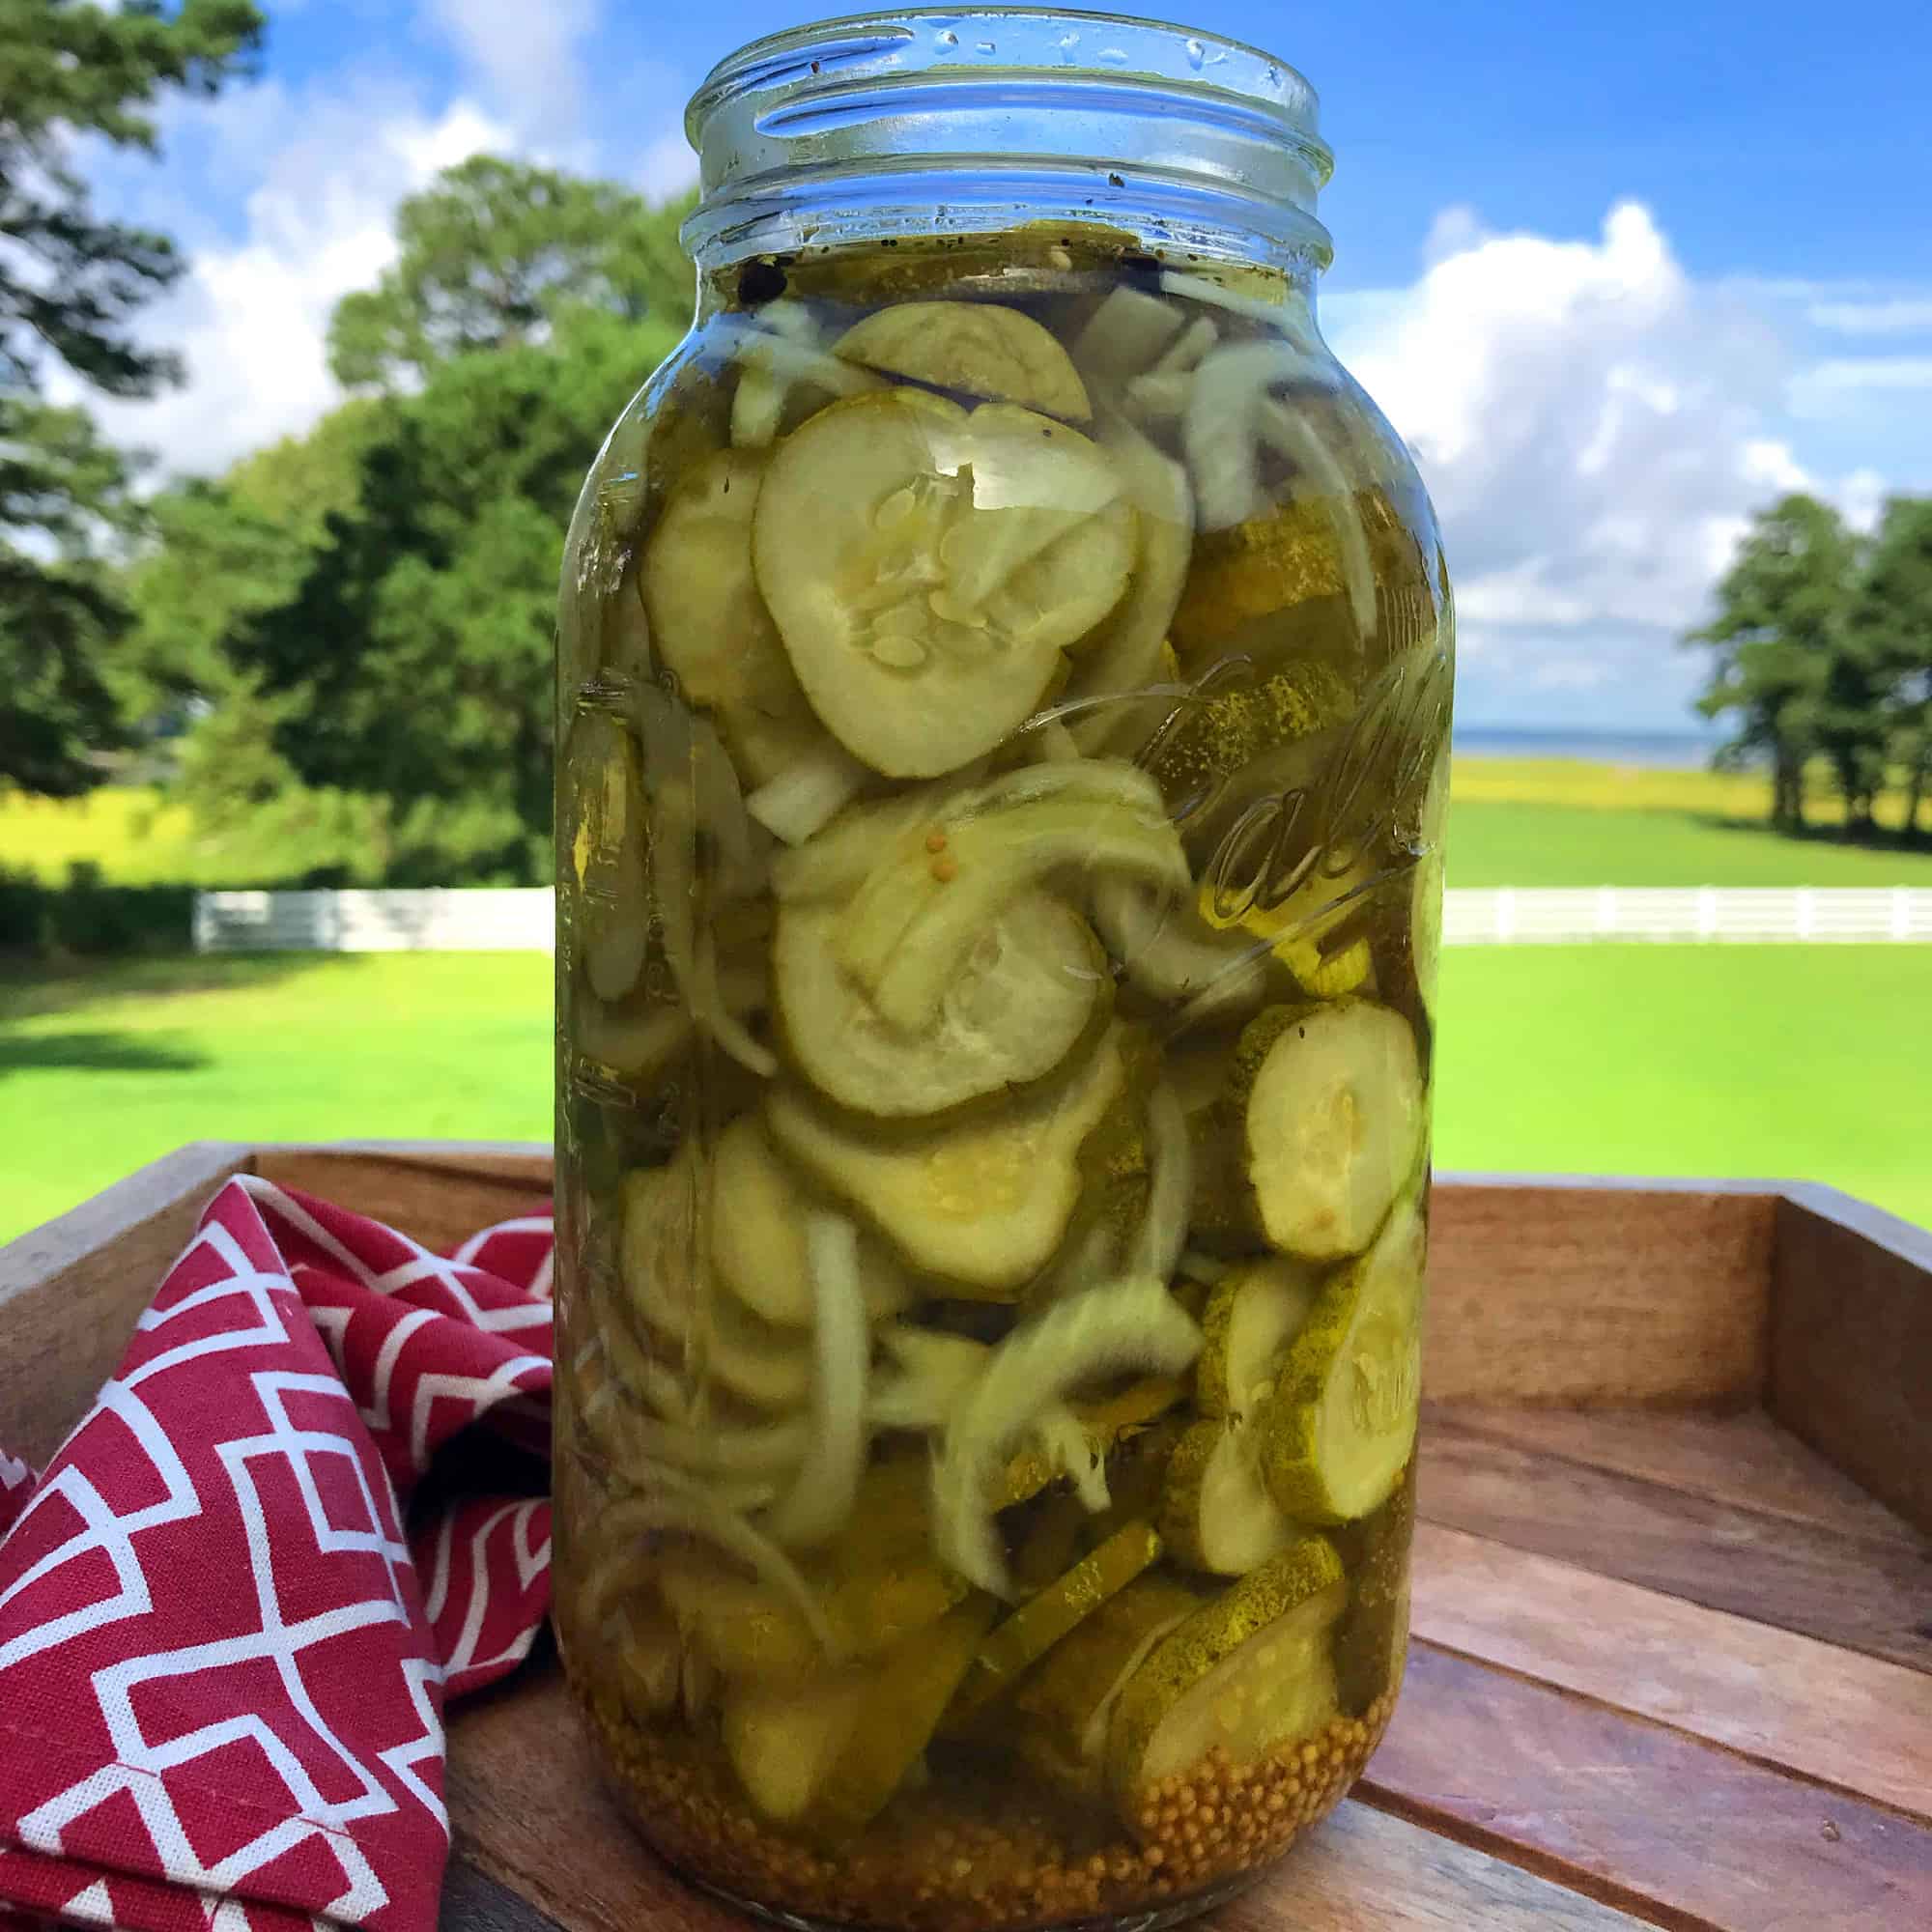 Bread and Butter Pickles - The Daring Gourmet